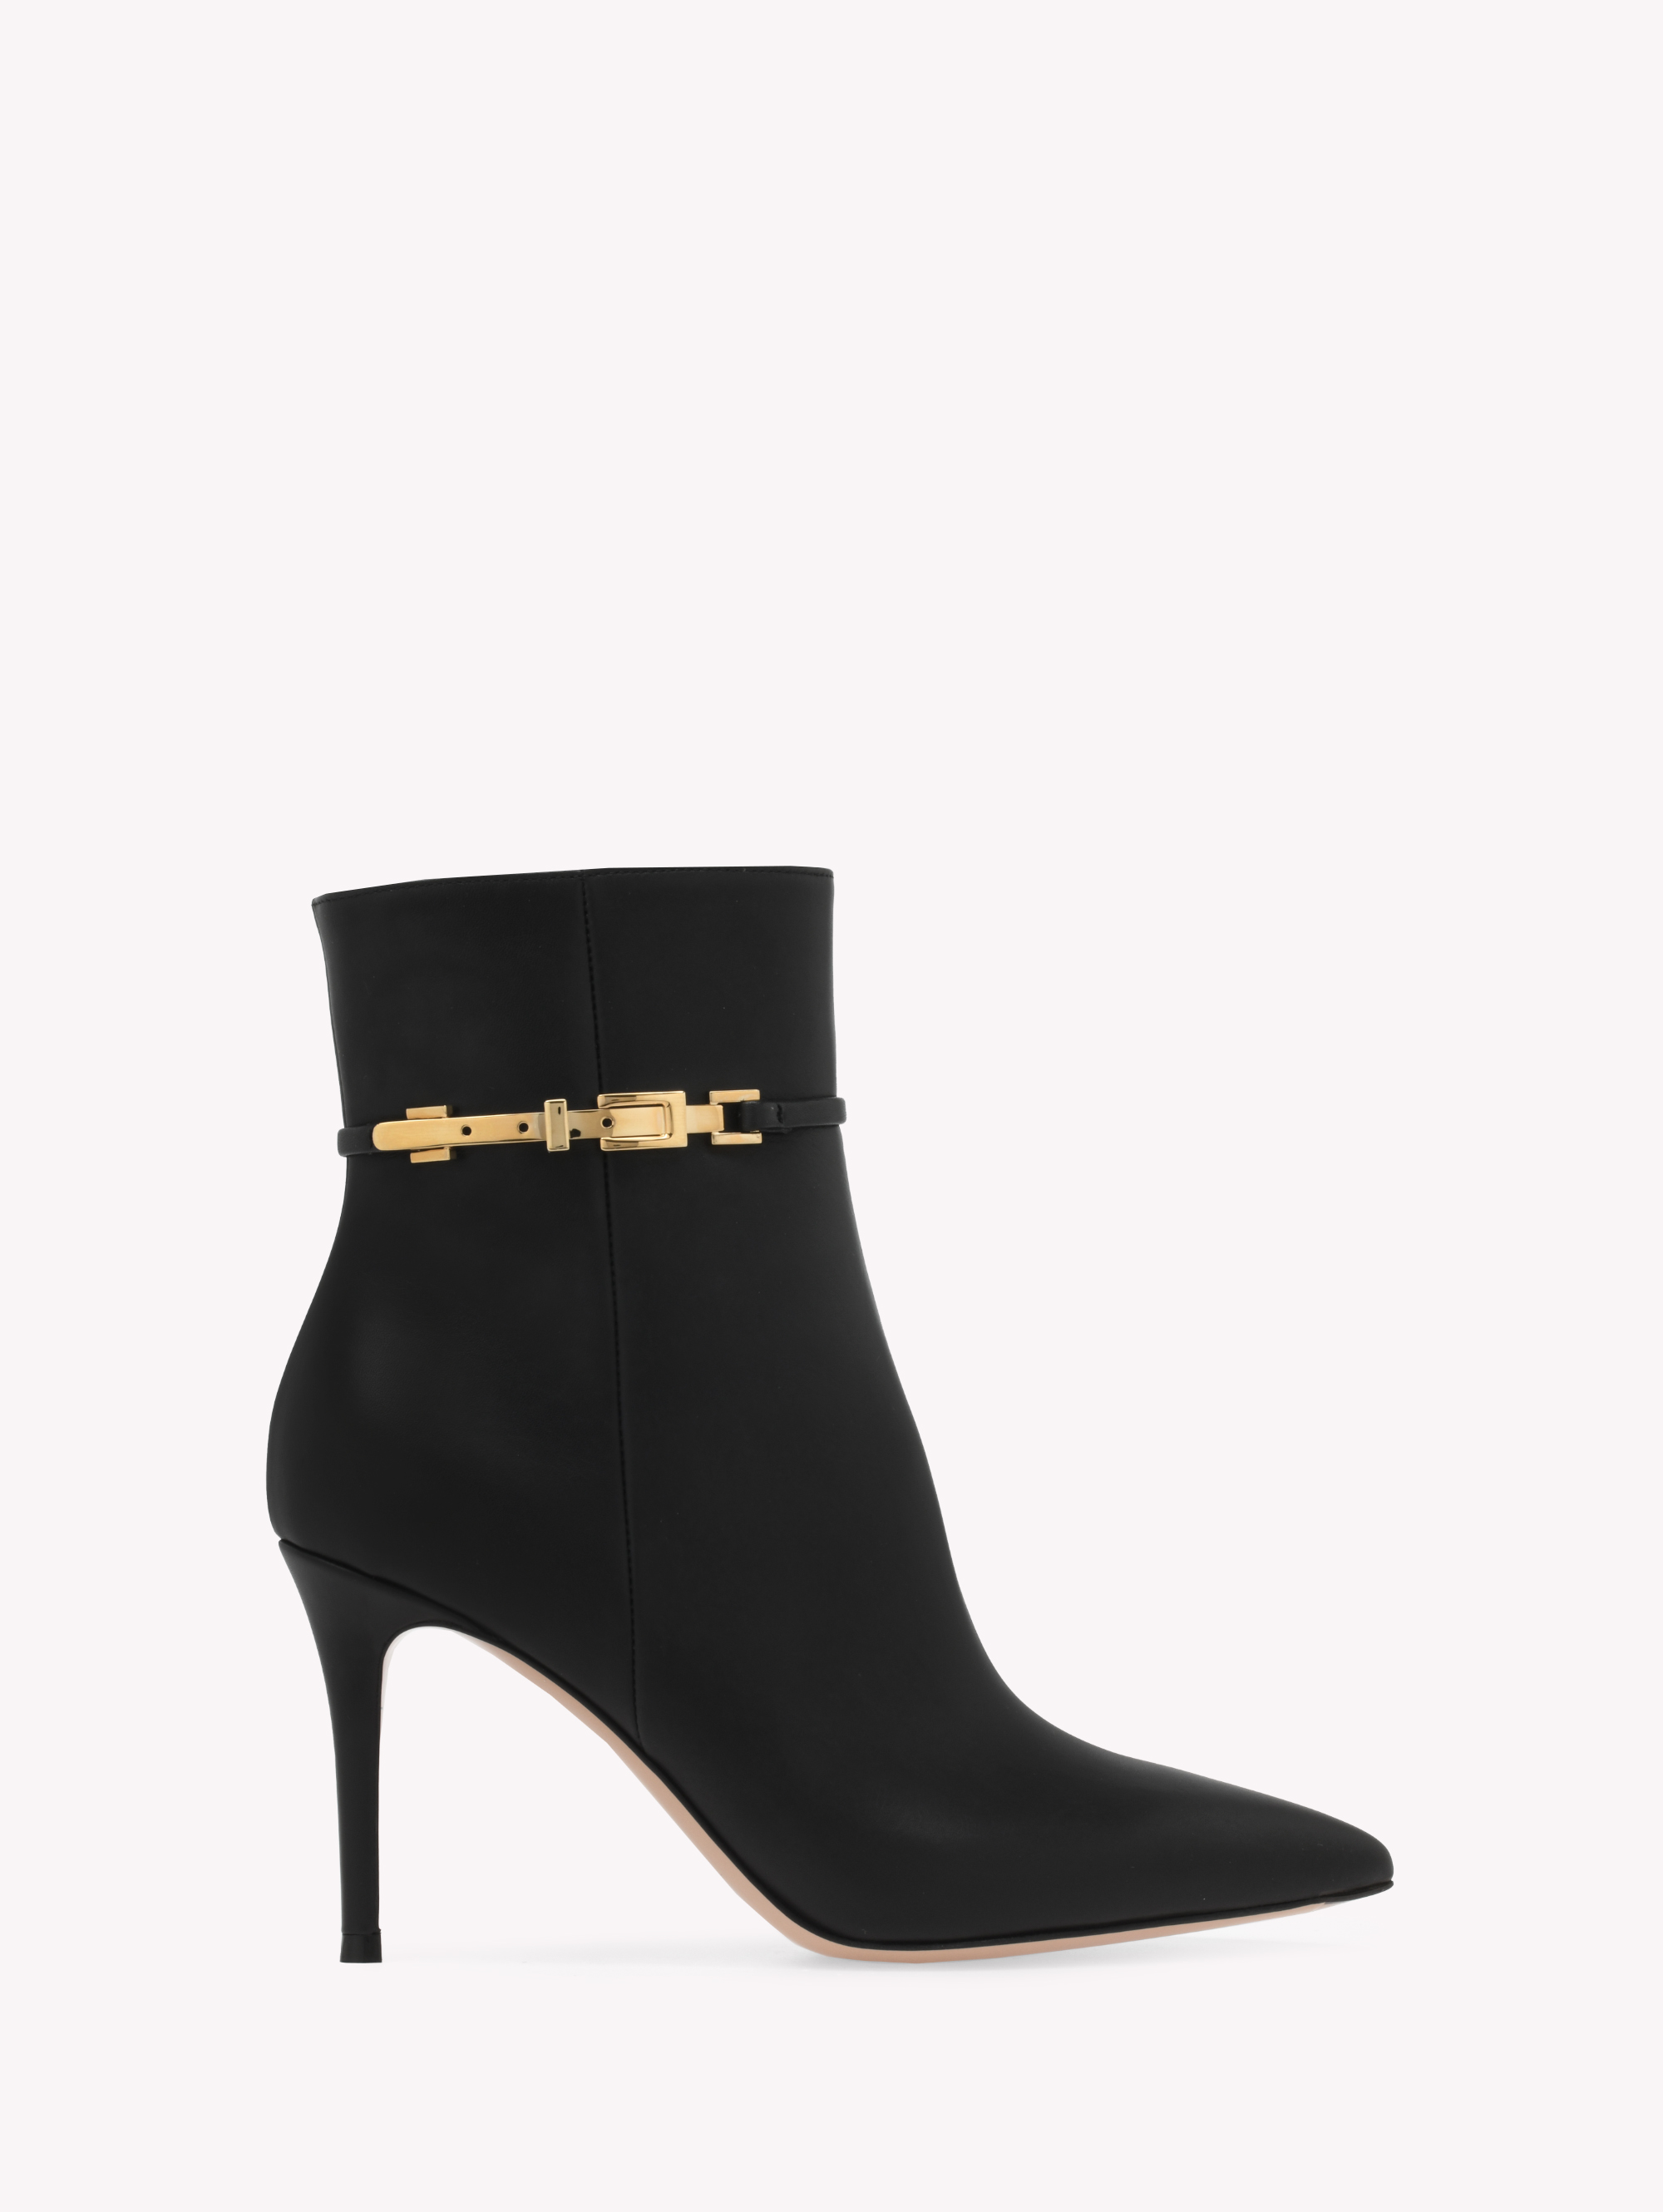 Ankle Boots for Women CARREY BOOTIE 85 | Gianvito Rossi